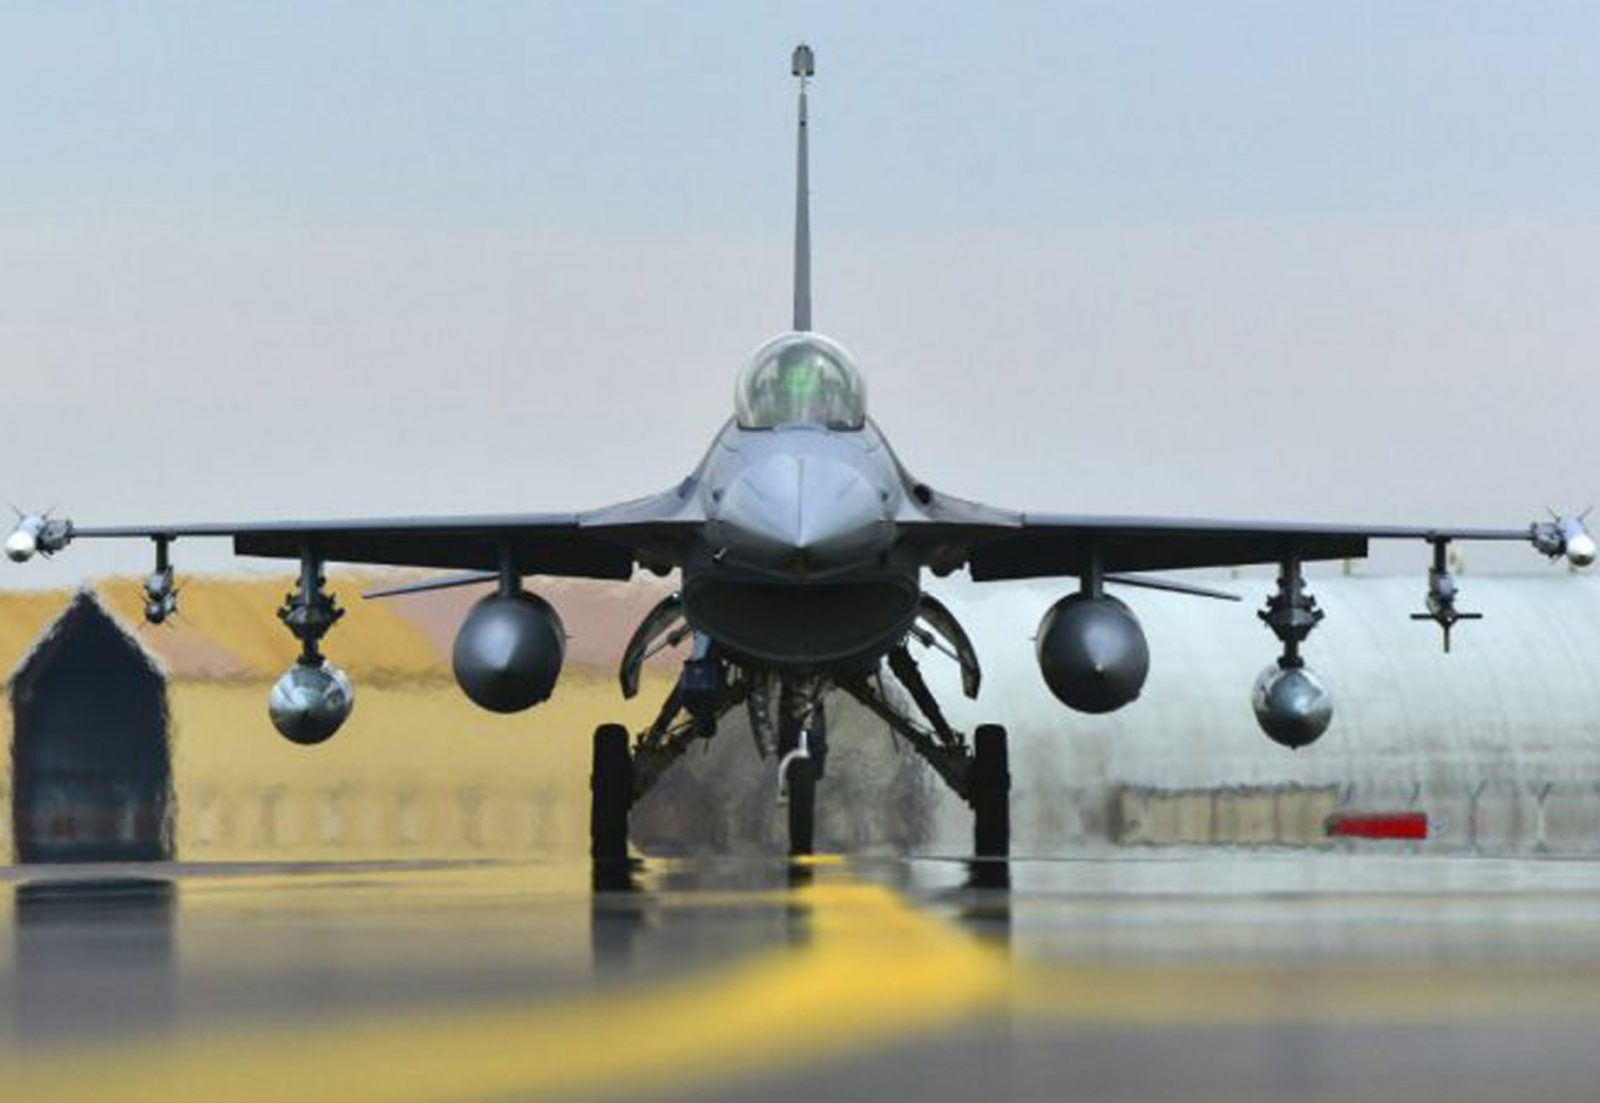 Lesser-known facts about the F-16 Fighting Falcon